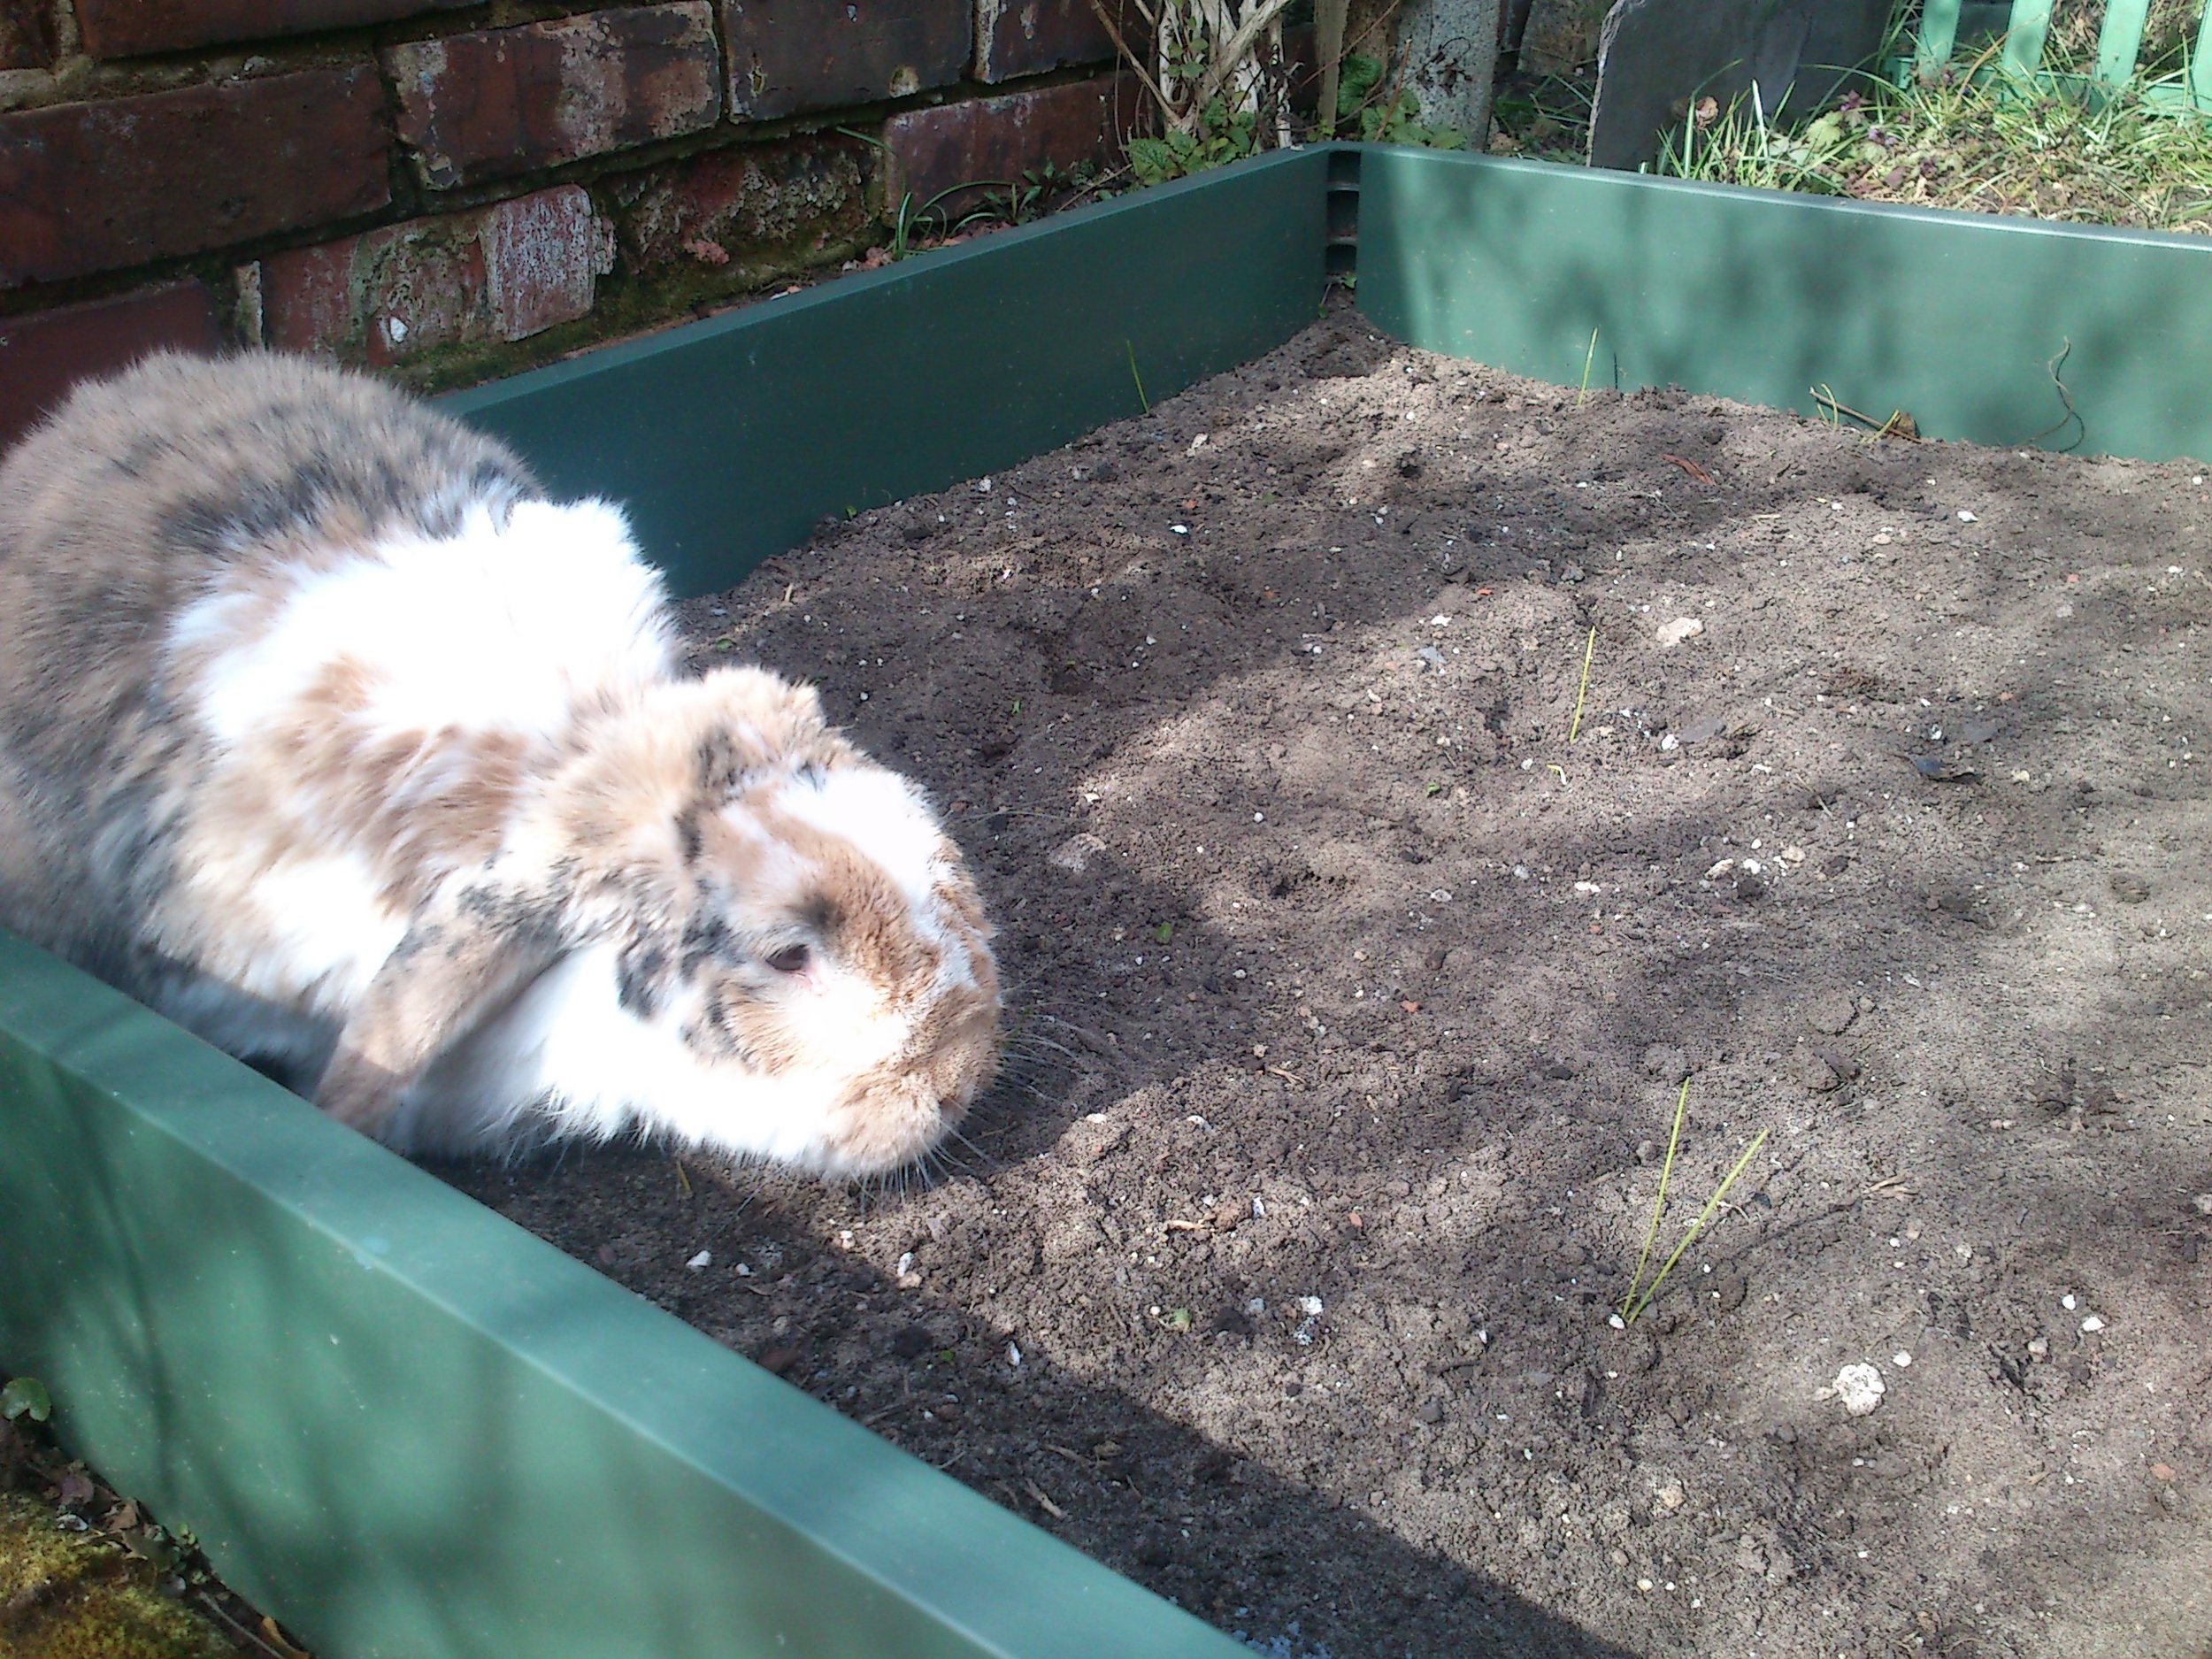 Impatient Bunny Checks the Newly-Planted Garden for Vegetables